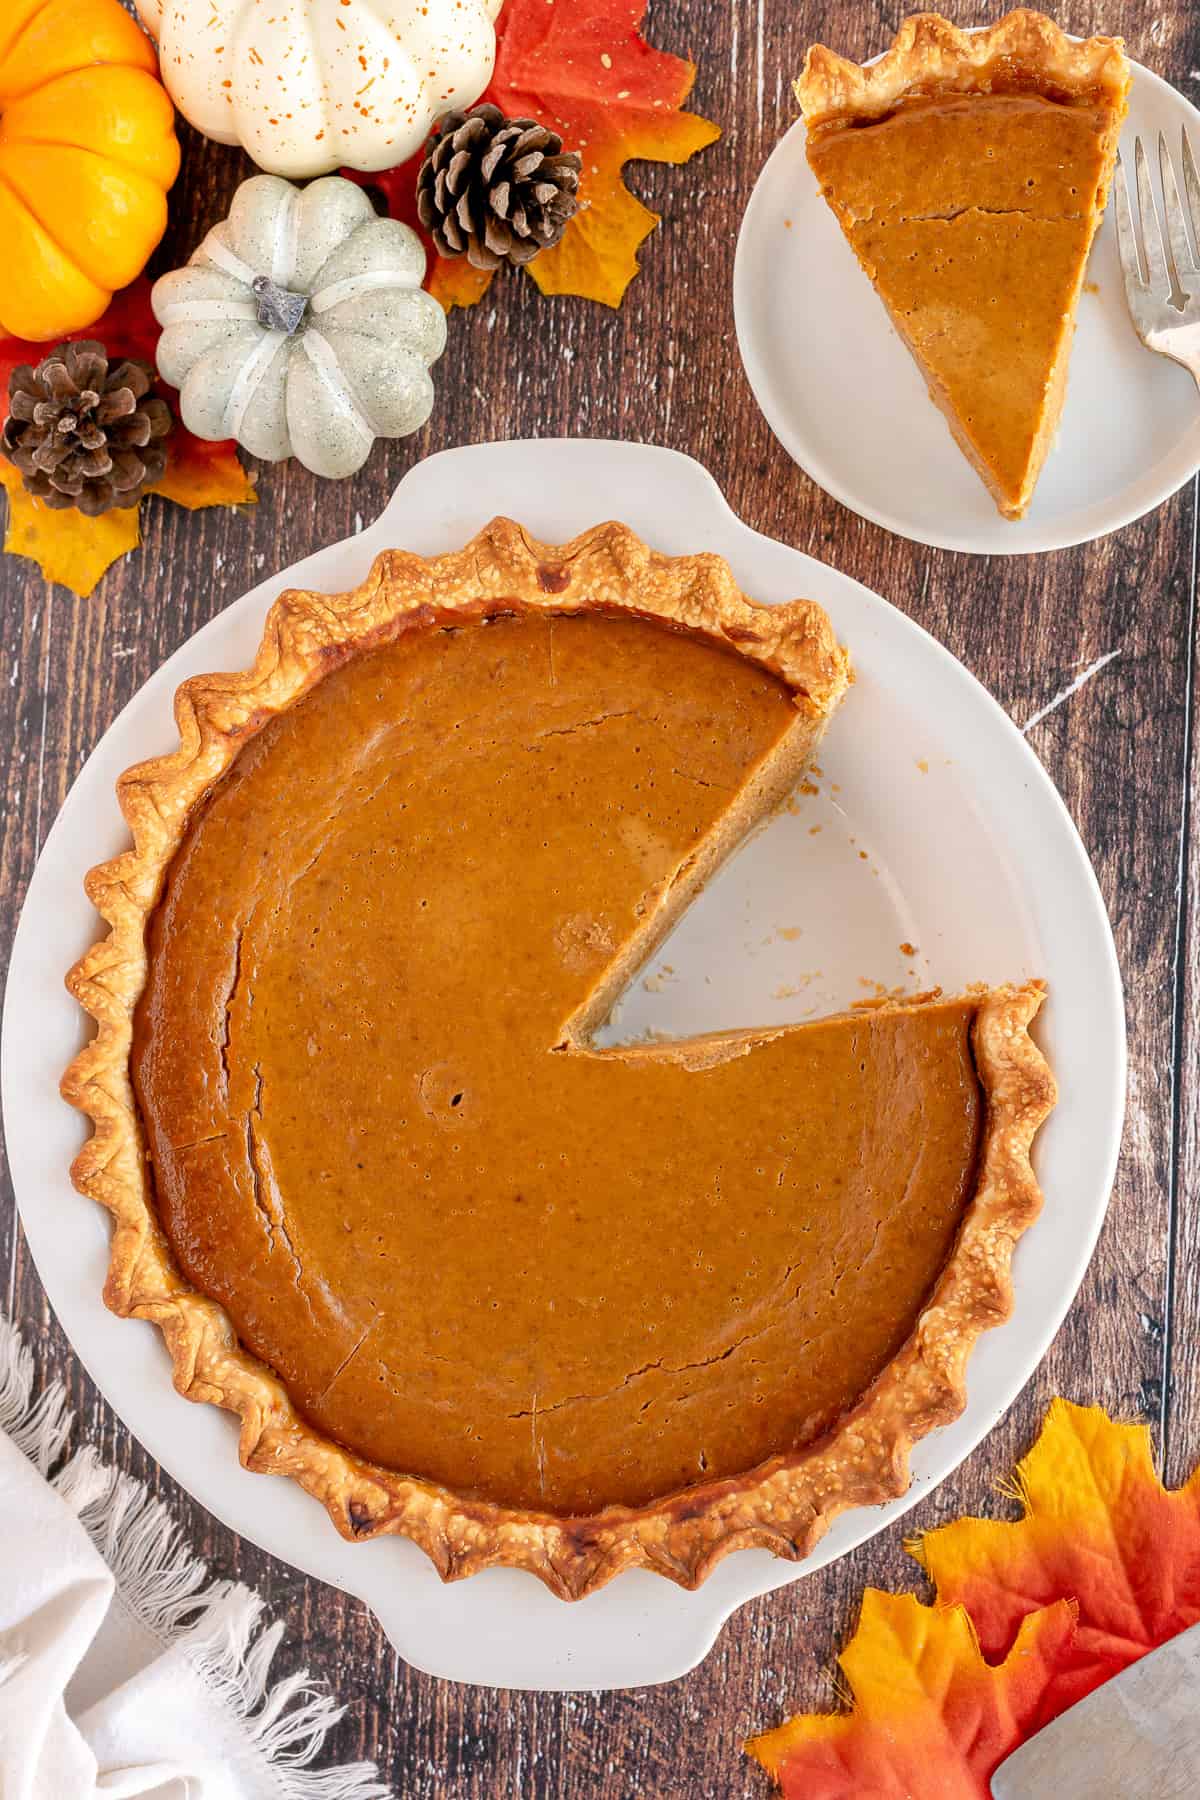 An over the top shot of a pumpkin pie with a slice missing next to a plate with a slice.